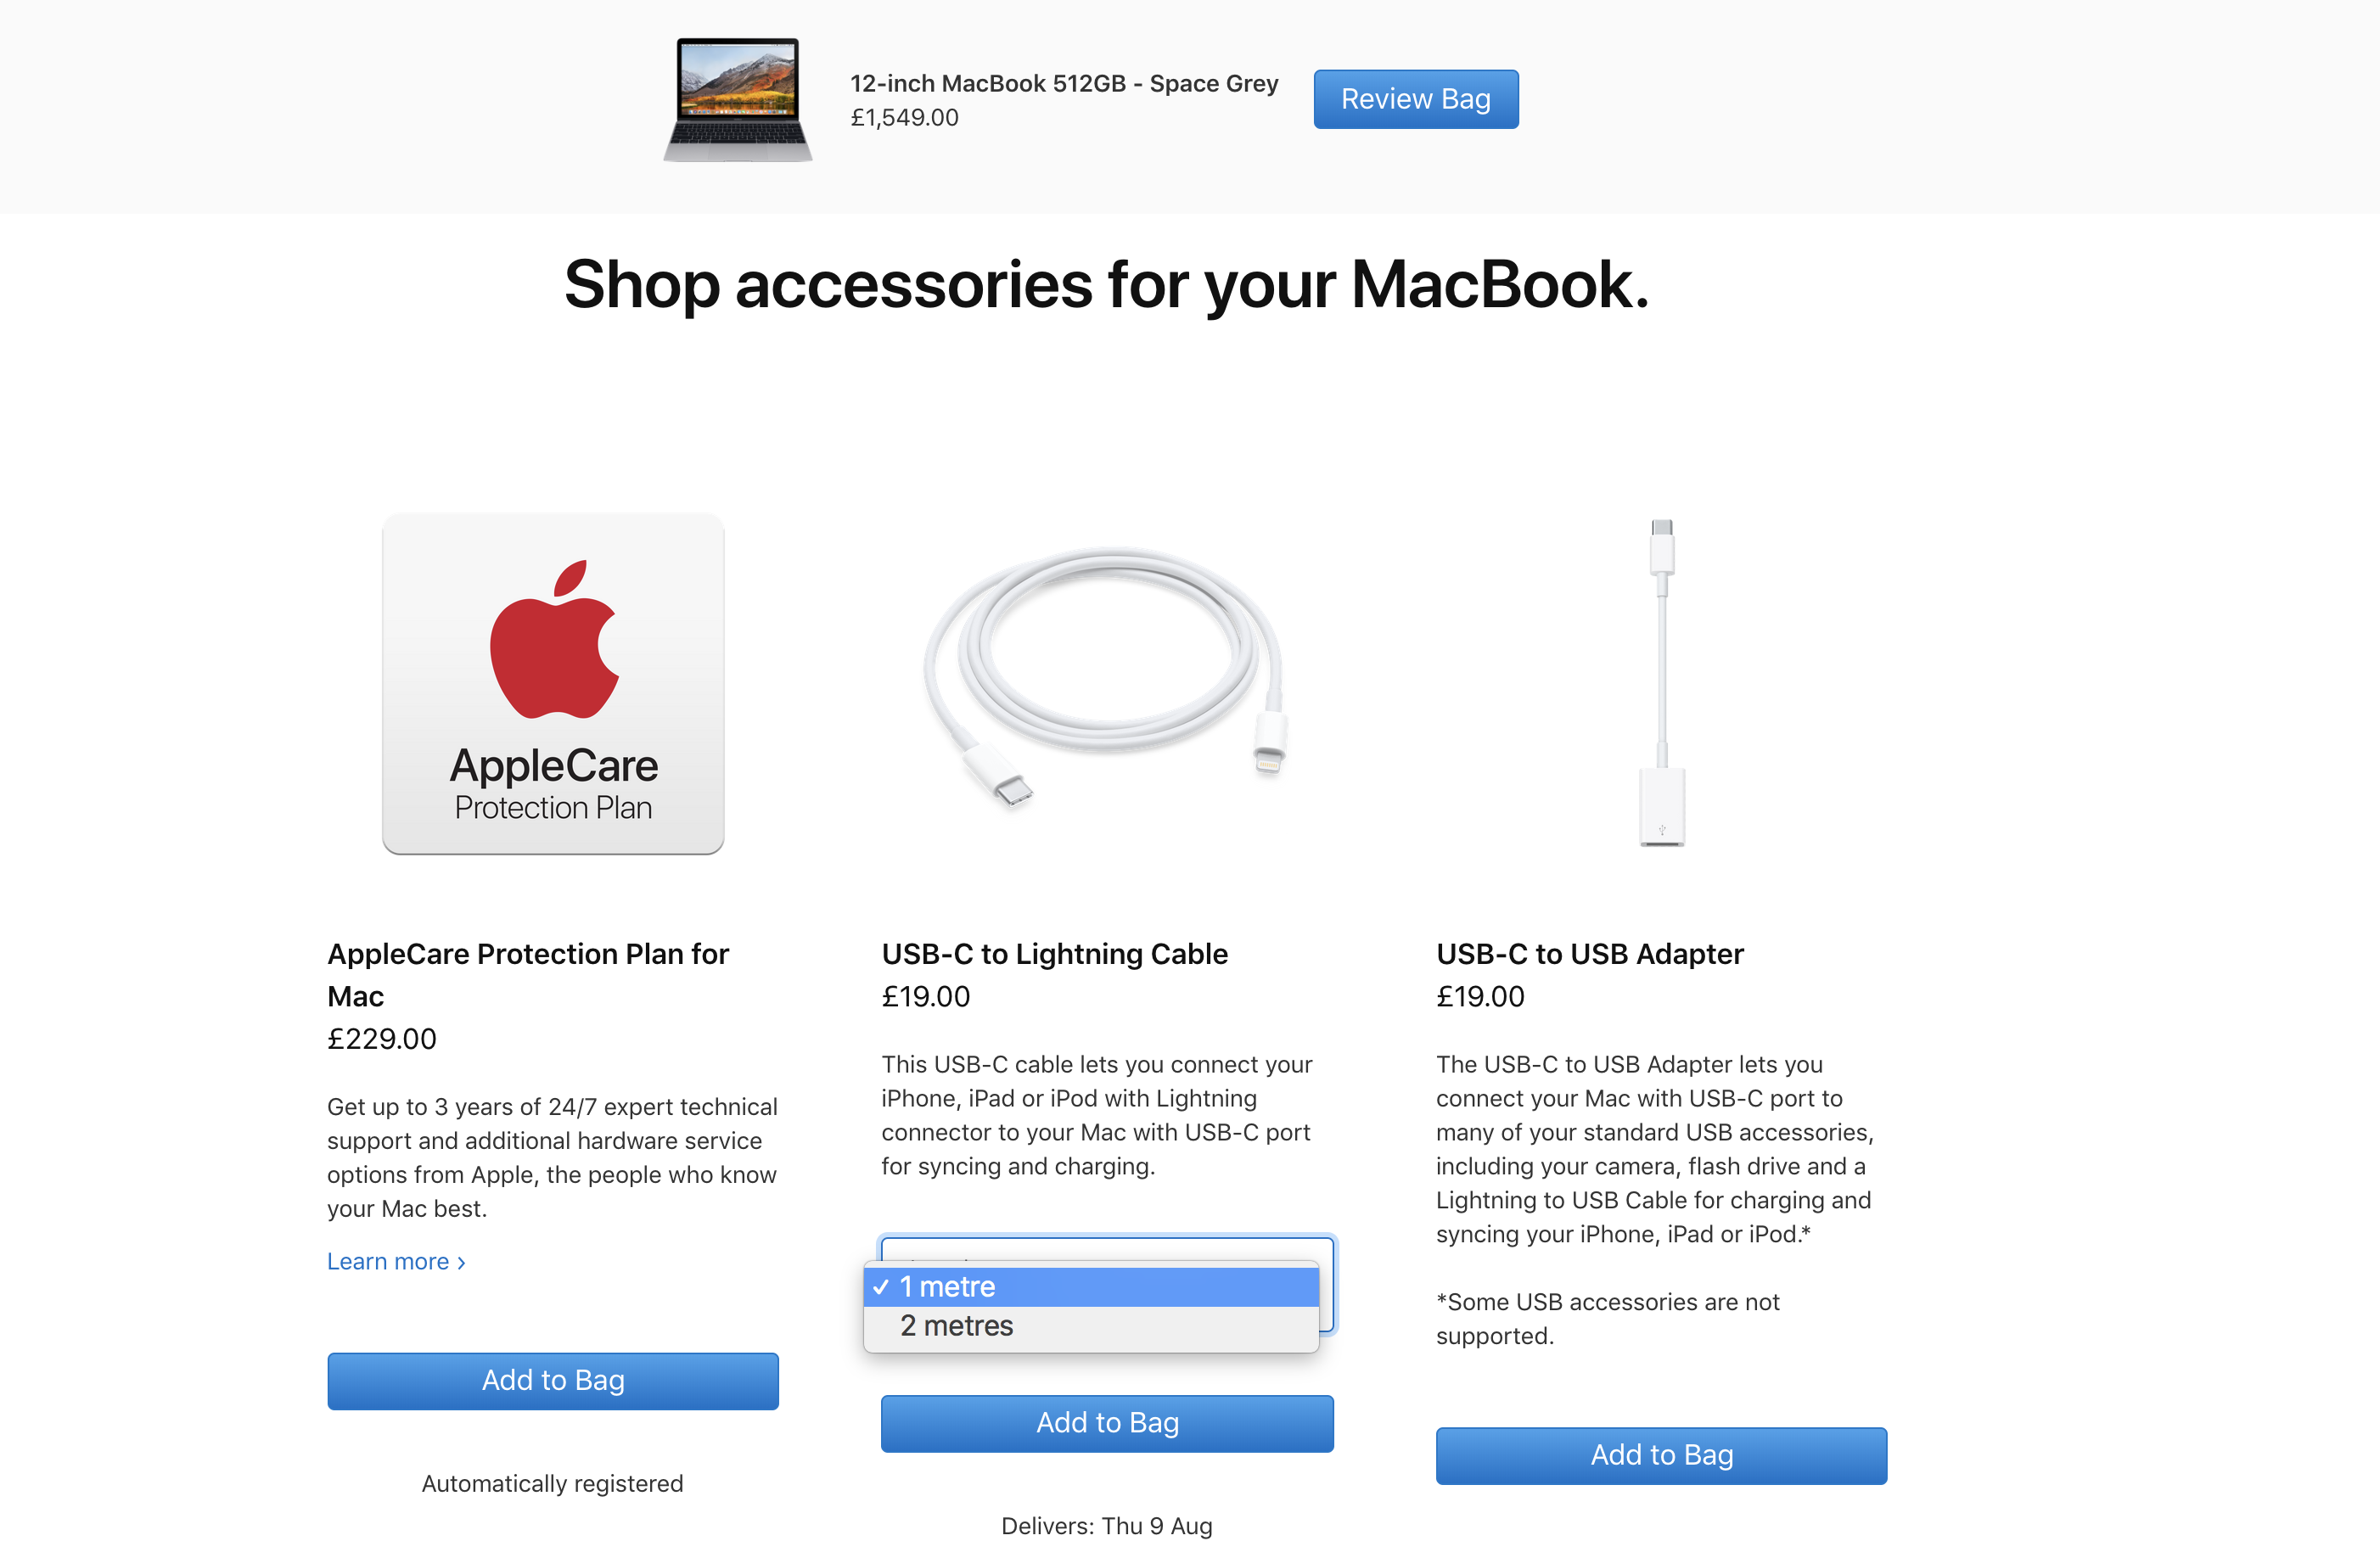 Apple make extensive use of cross-sells. In this example you can see accessory and service cross-selling – plus a cheeky upsell for a longer Lightning Cable!